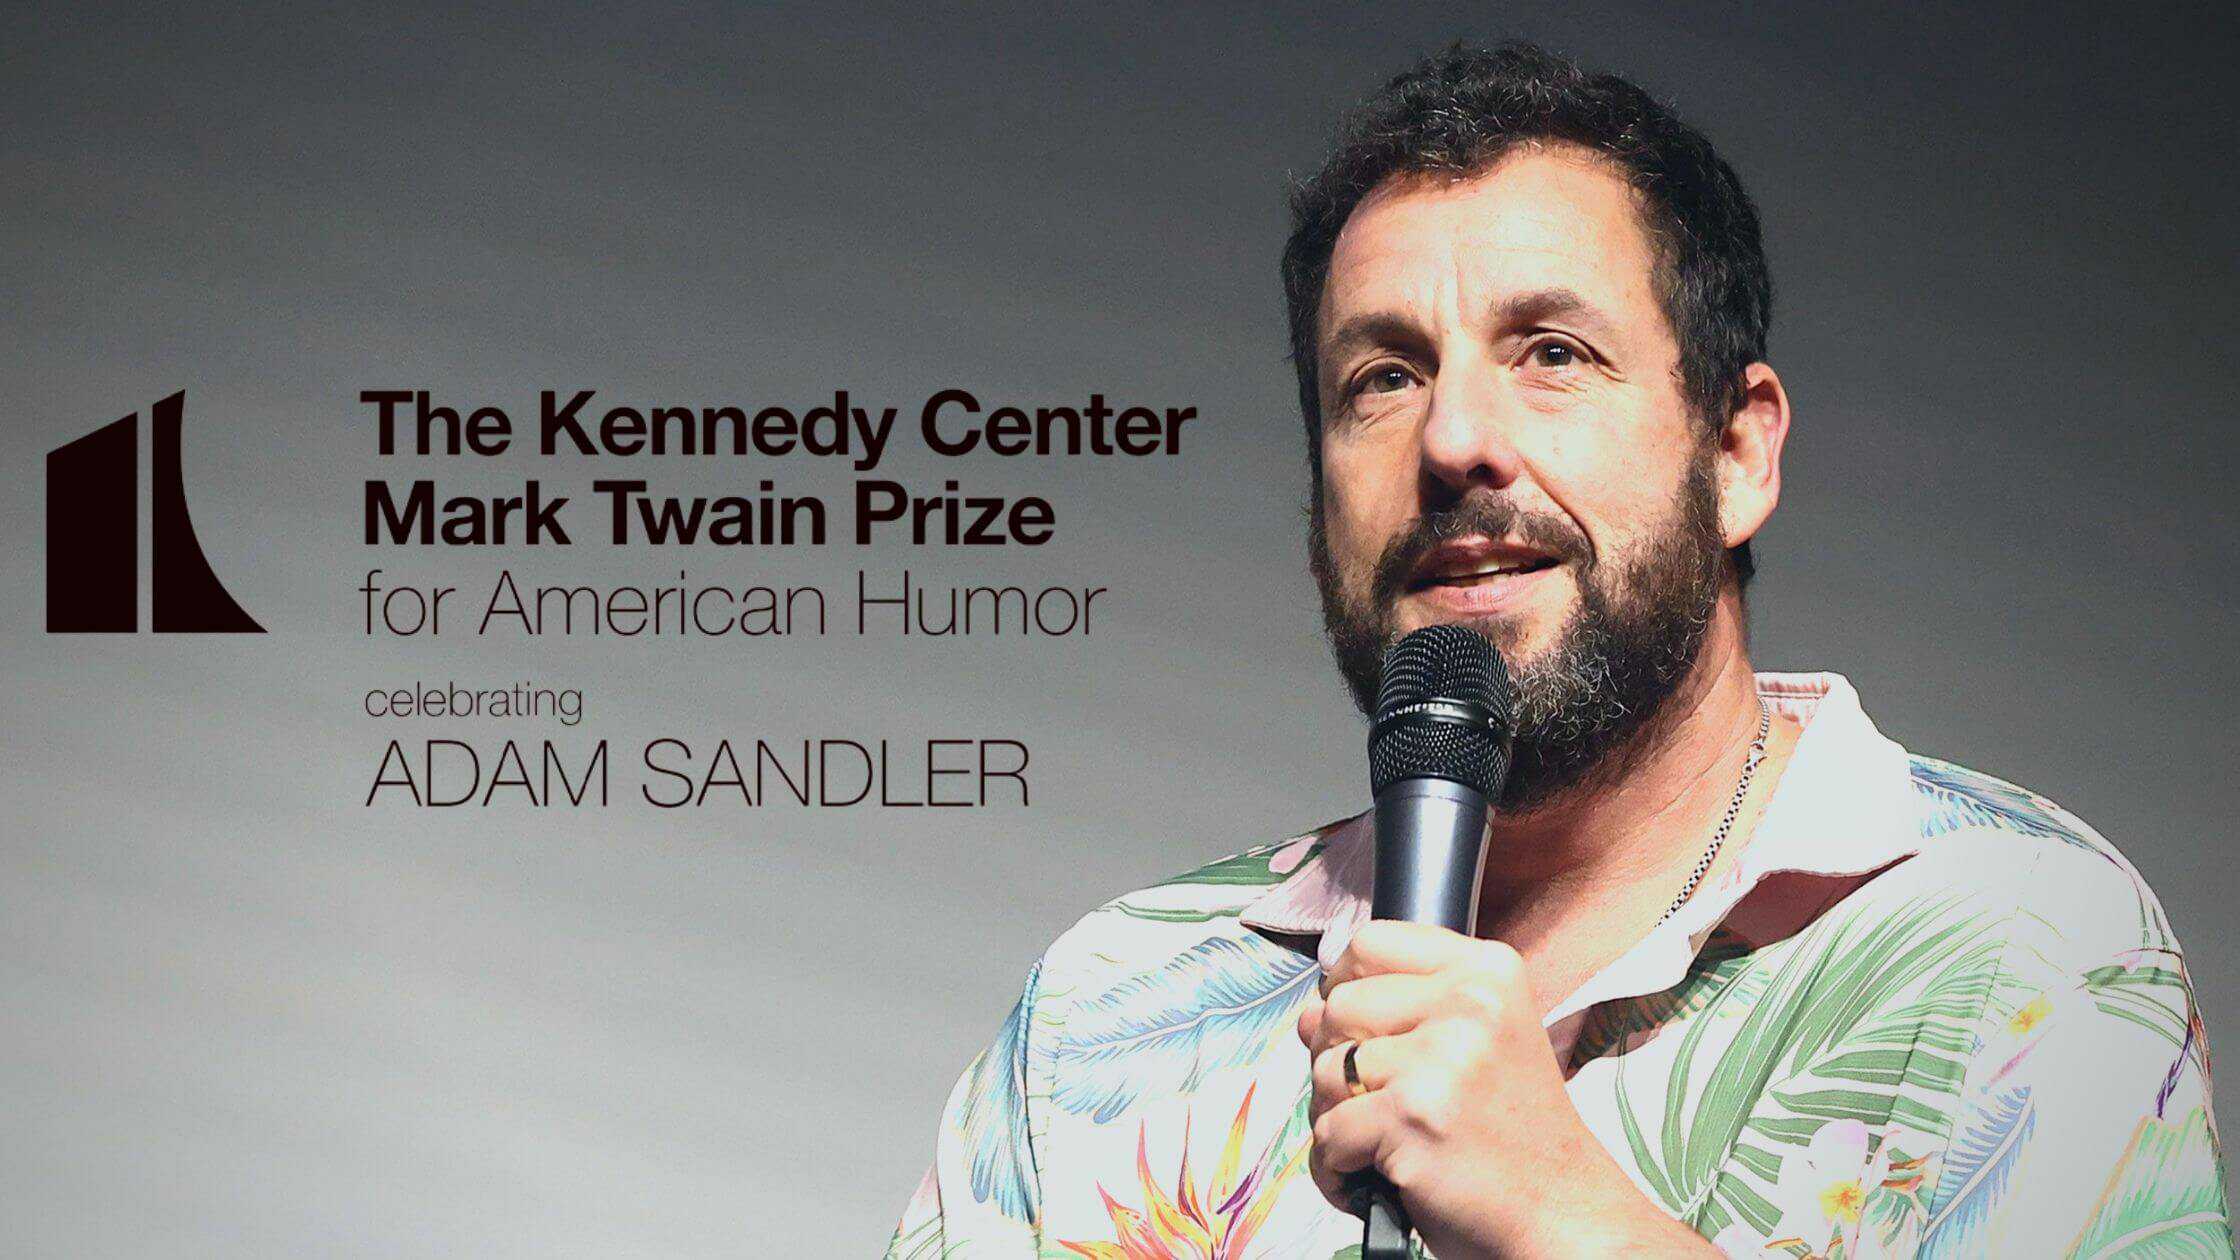 Adam Sandler Will Be Awarded The Mark Twain Prize For American Humor